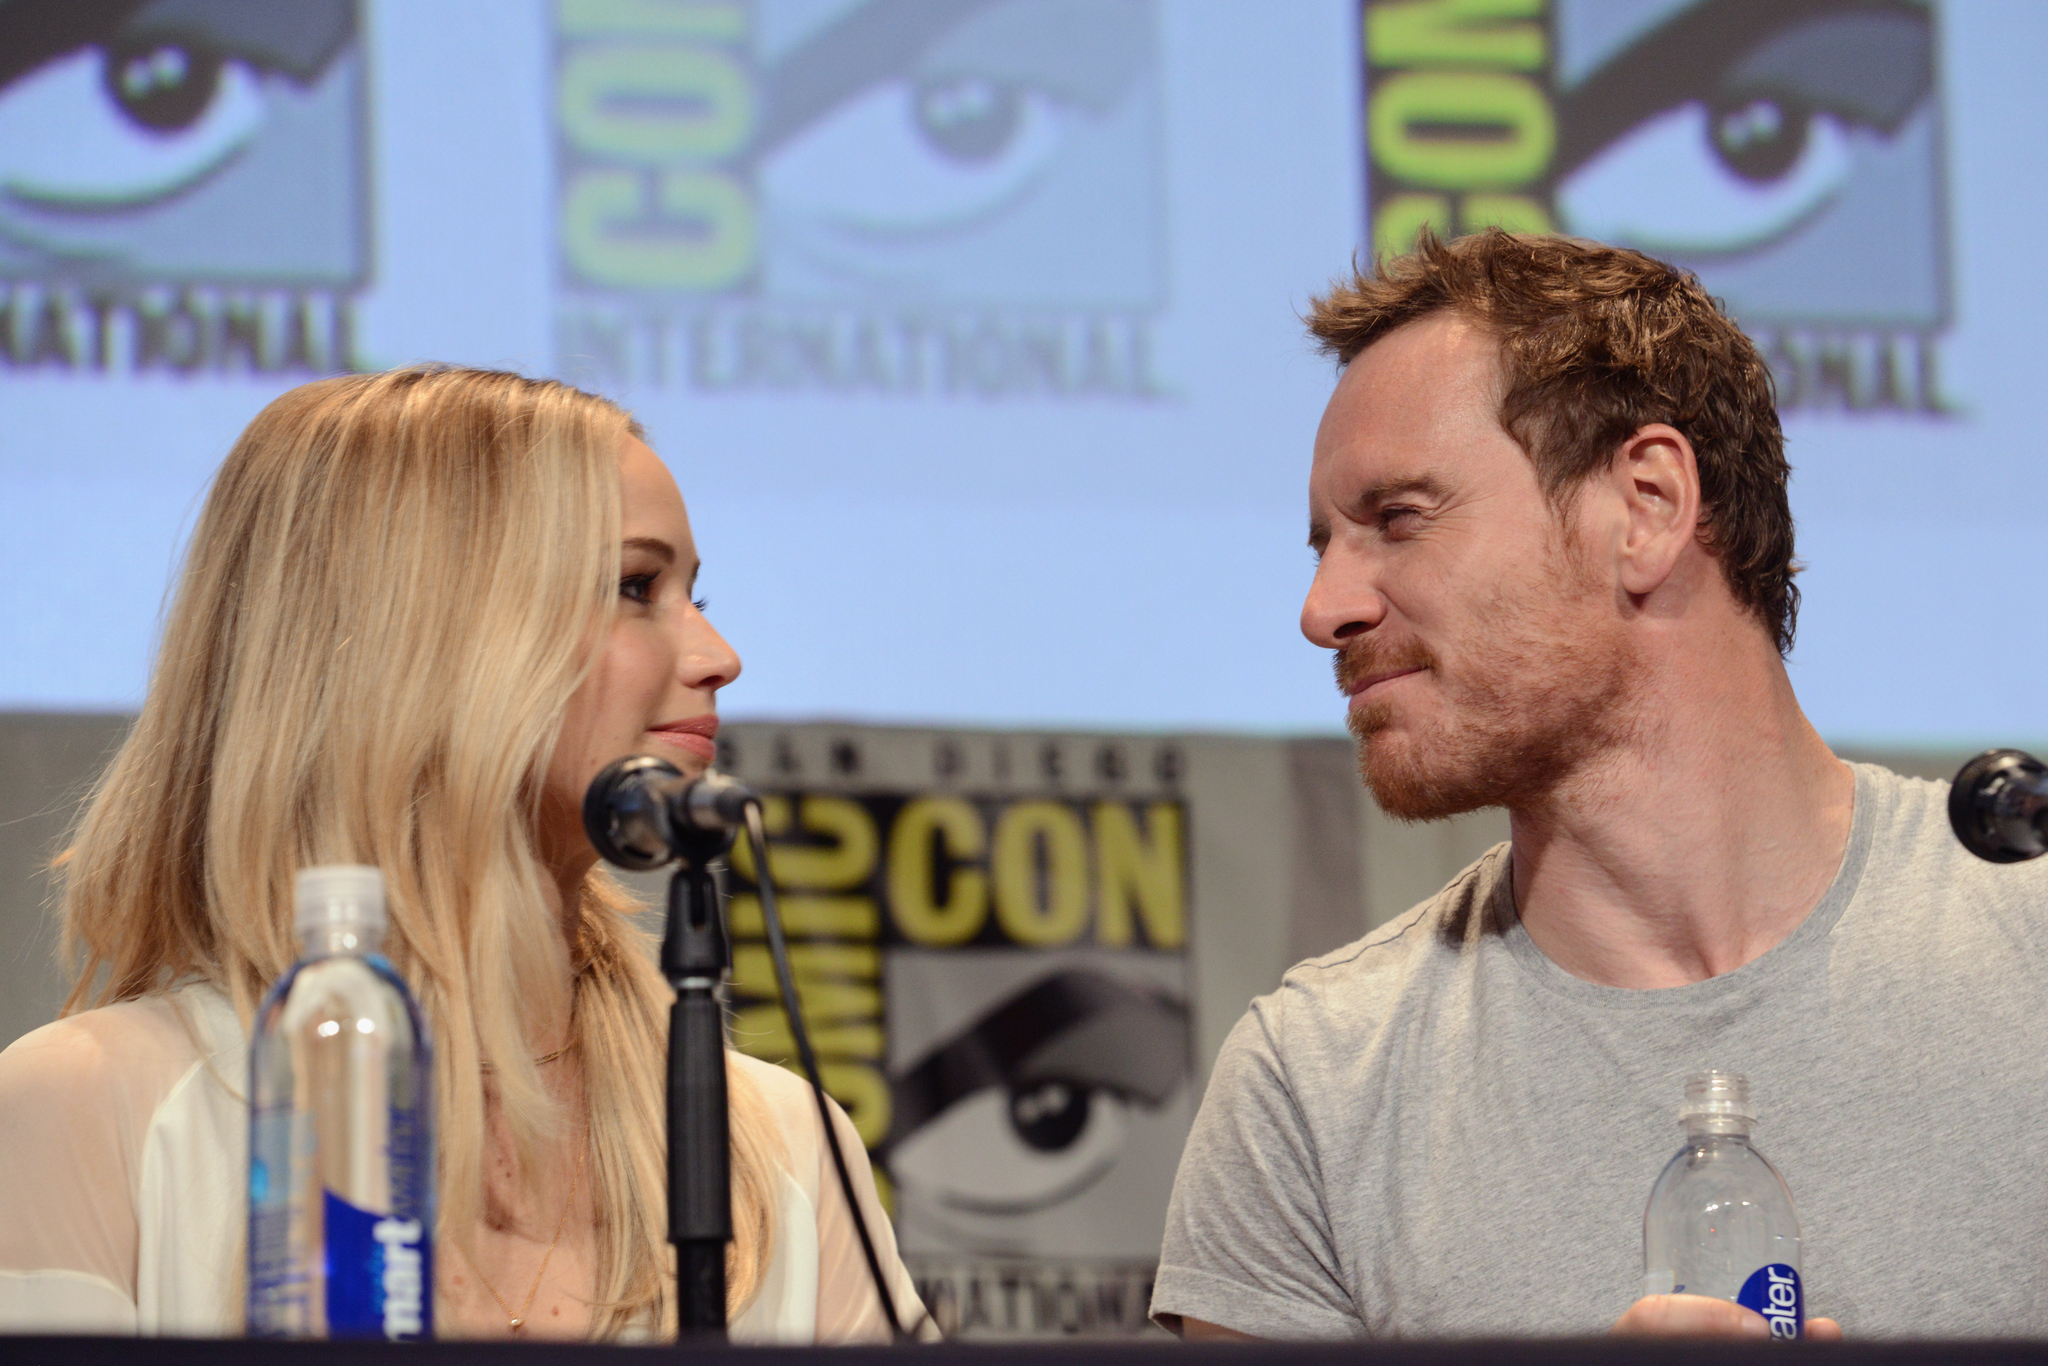 Michael Fassbender and Jennifer Lawrence at event of Deadpool (2016)